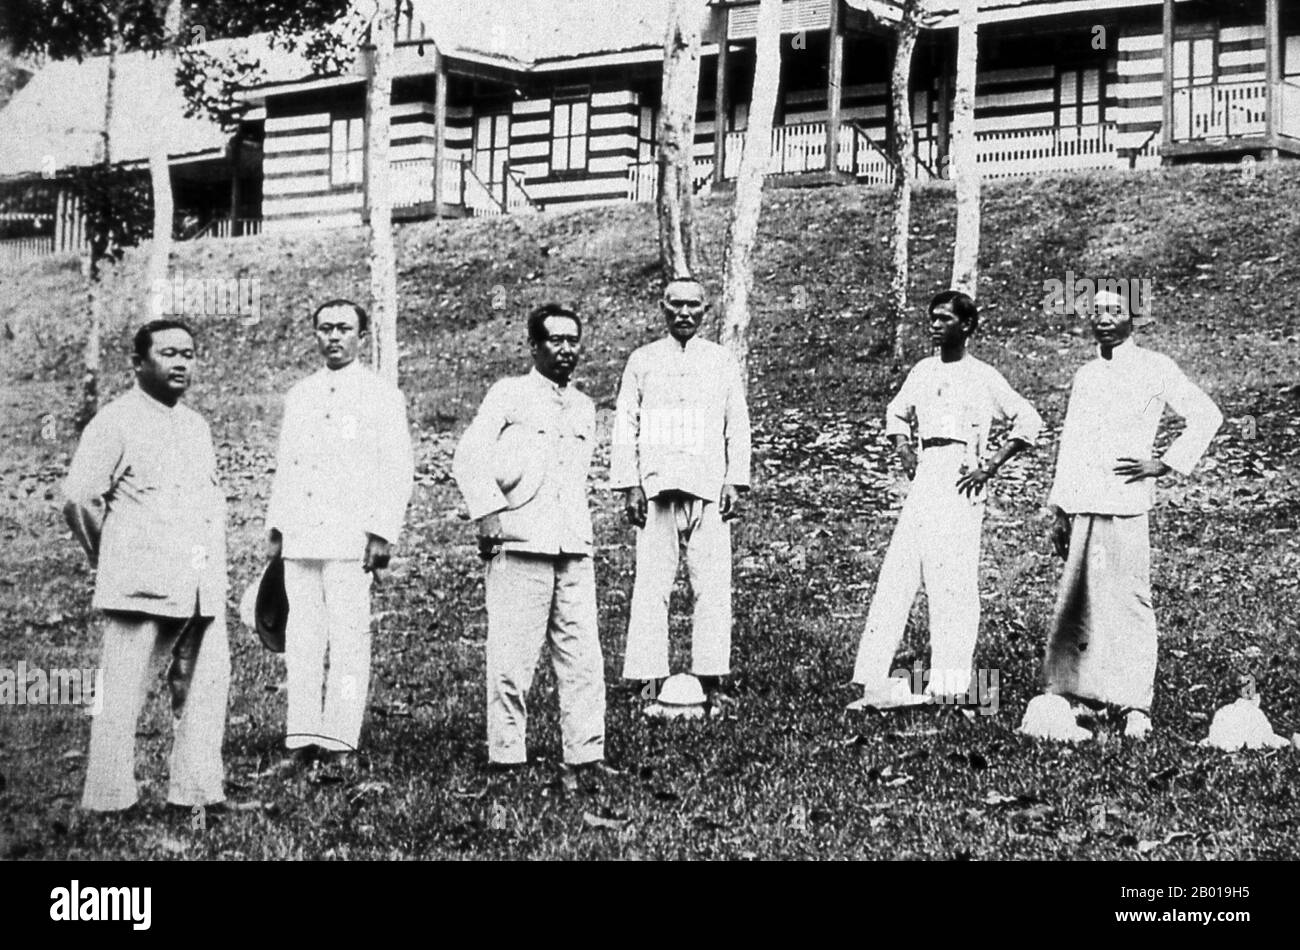 Thailand: A group of Thai government civil servants, Phuket. c. 1920.  Phuket, formerly known as Talang and, in Western sources, Junk Ceylon (a corruption of the Malay Tanjung Salang, i.e. 'Cape Salang'), is one of the southern provinces (changwat) of Thailand. Neighbouring provinces are (from north clockwise) Phang Nga and Krabi, but as Phuket is an island there are no land boundaries.  Phuket, which is approximately the size of Singapore, is Thailand’s largest island. The island is connected to mainland Thailand by two bridges. It is situated off the west coast of Thailand in the Andaman Sea Stock Photo